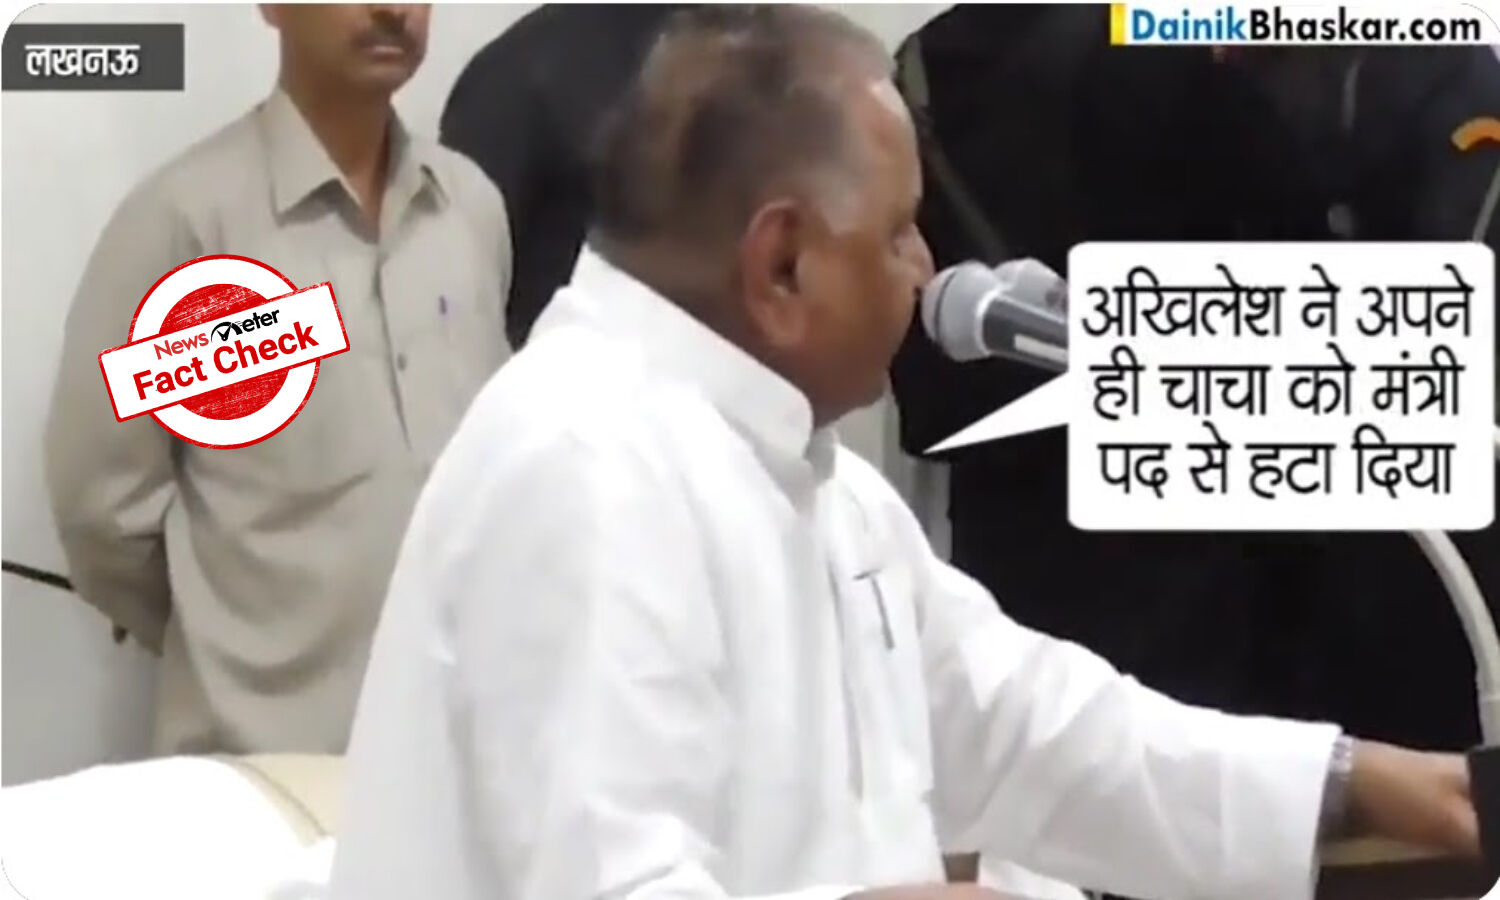 Fact Check: Old video of Mulayam Singh Yadav shared as recent